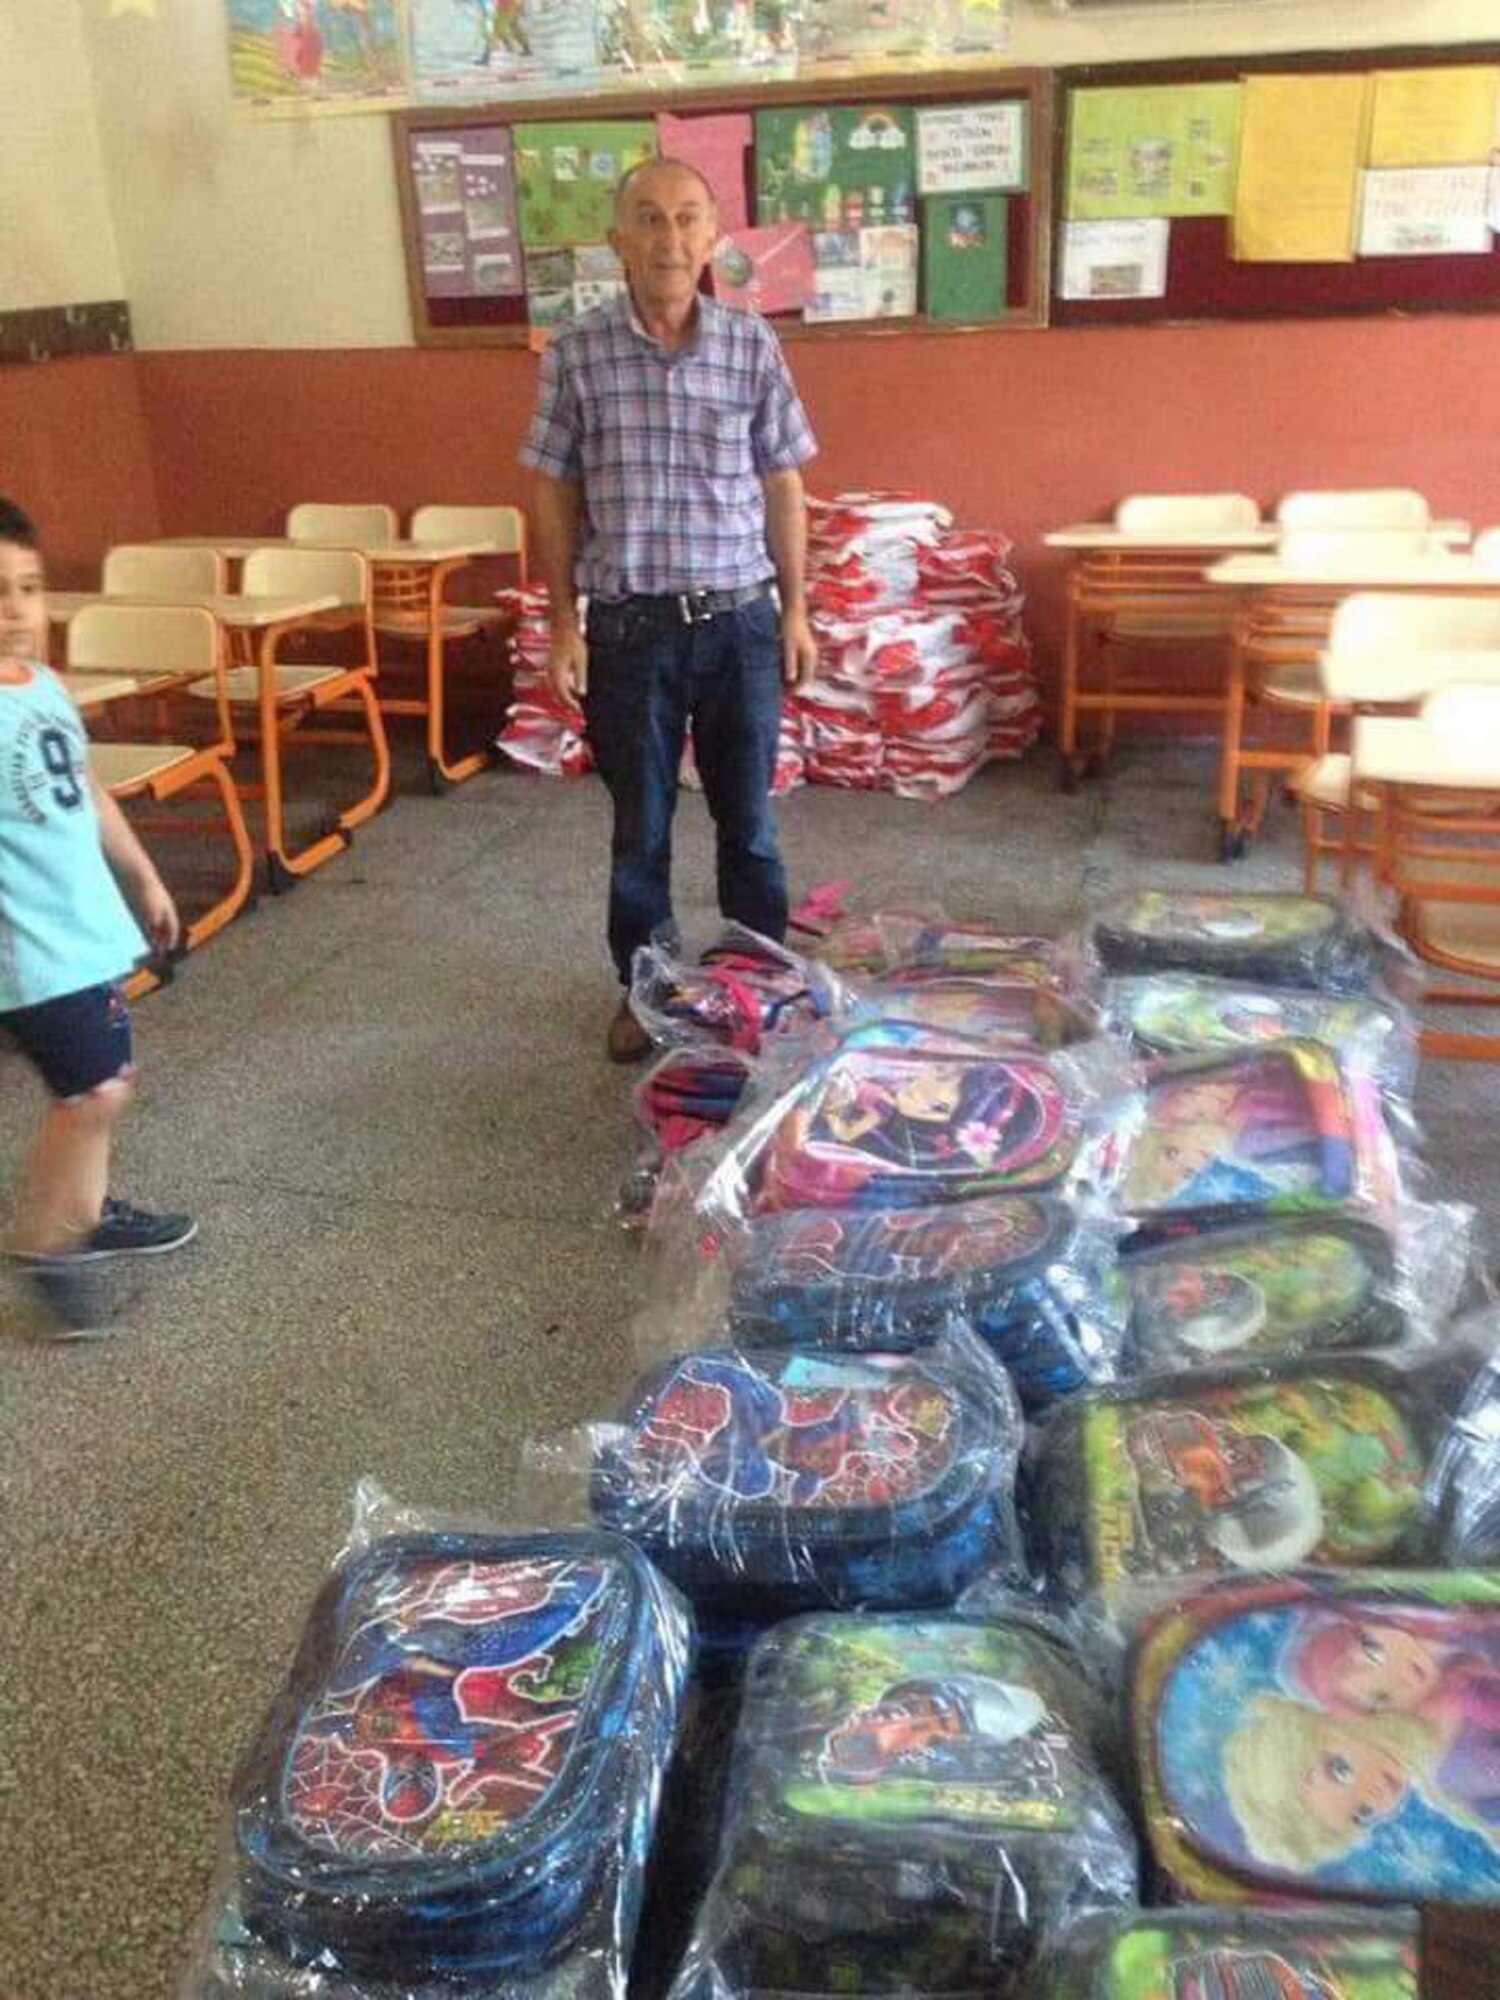 A teacher at Necmiye CoskunTuncel Ilkokulu Primary School receives backpacks and other school supplies for local Turkish students before the first day of school in Adana, Turkey.